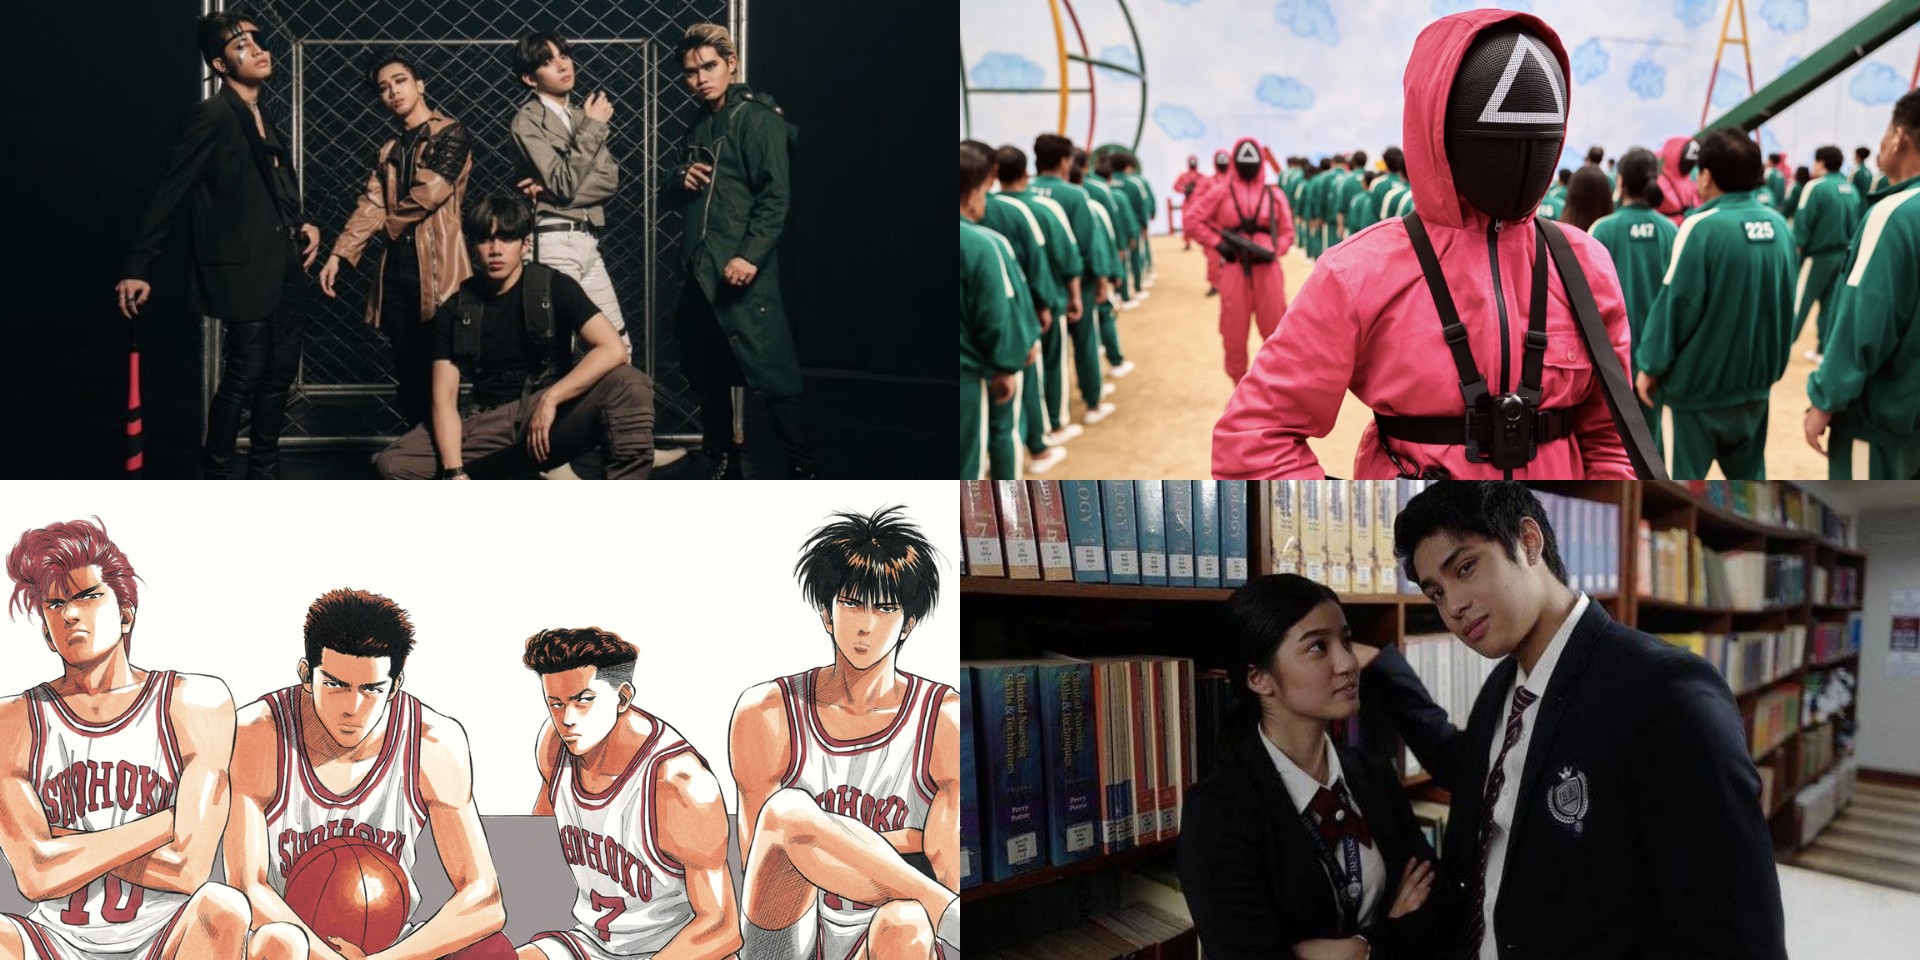 SB19, 'Squid Game', Tokyo 2020, 'He's Into Her', and more dominate Twitter Philippines 2021